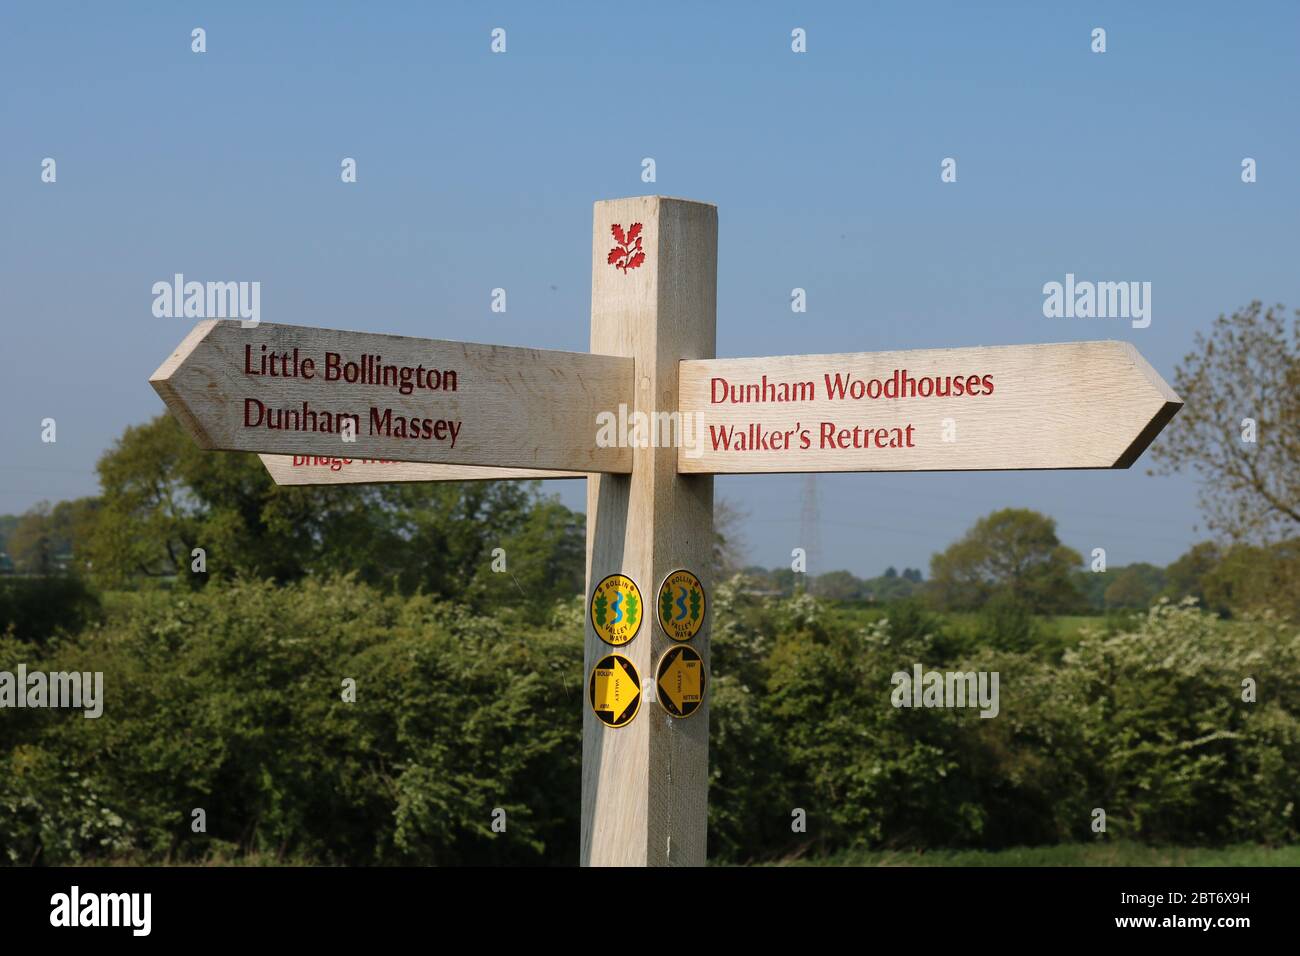 National Trust Wooden signpost showing directions to Little Bollington, Dunham Massey, and Dunham Woodhouses  with symbols for the Bollin Way Stock Photo